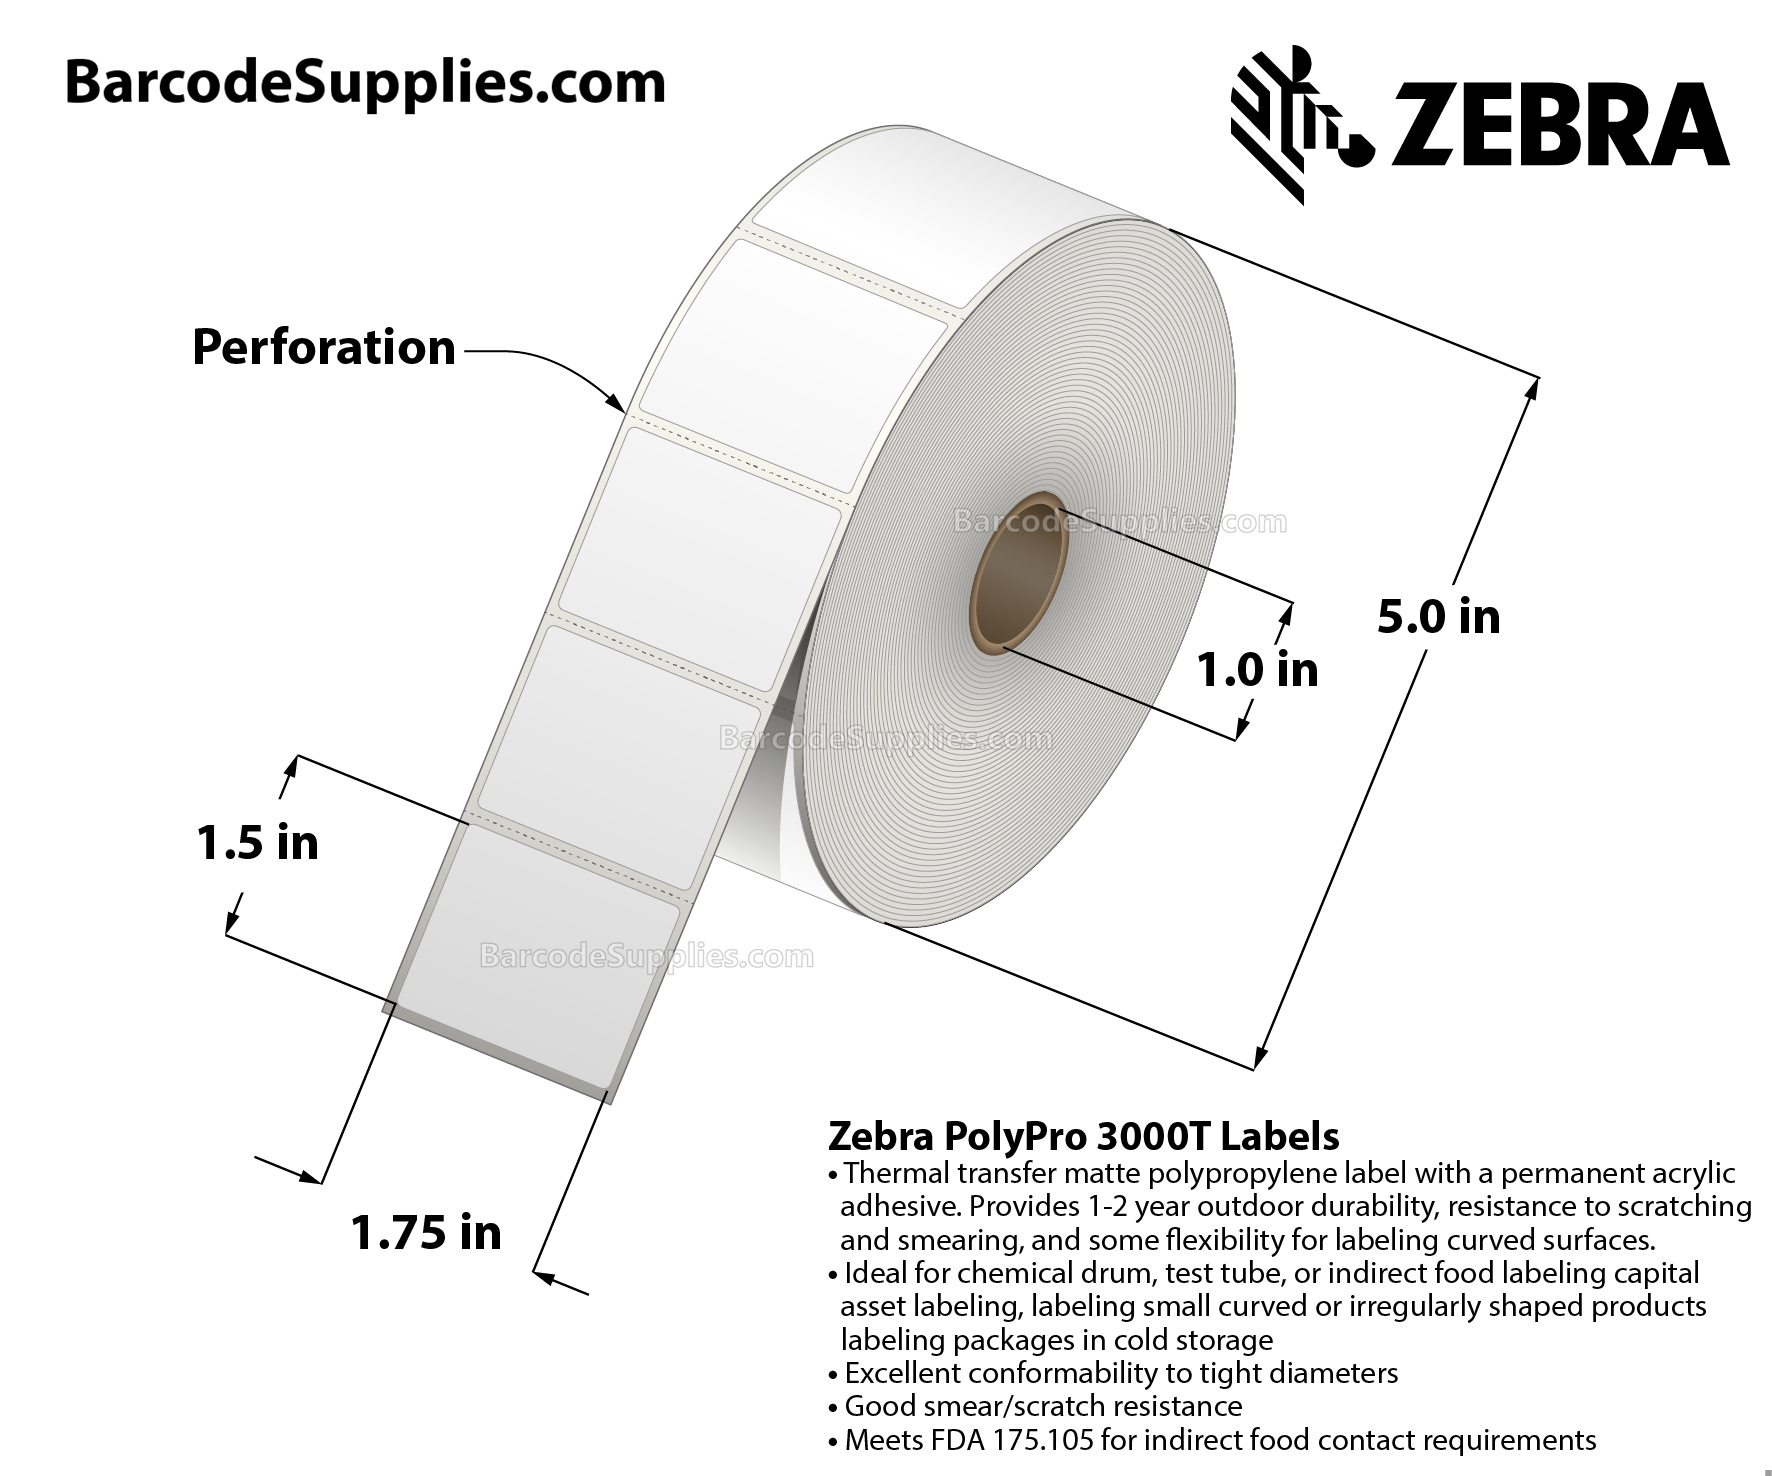 1.75 x 1.5 Thermal Transfer White PolyPro 3000T Labels With Permanent Adhesive - Perforated - 1450 Labels Per Roll - Carton Of 1 Rolls - 1450 Labels Total - MPN: 10023333